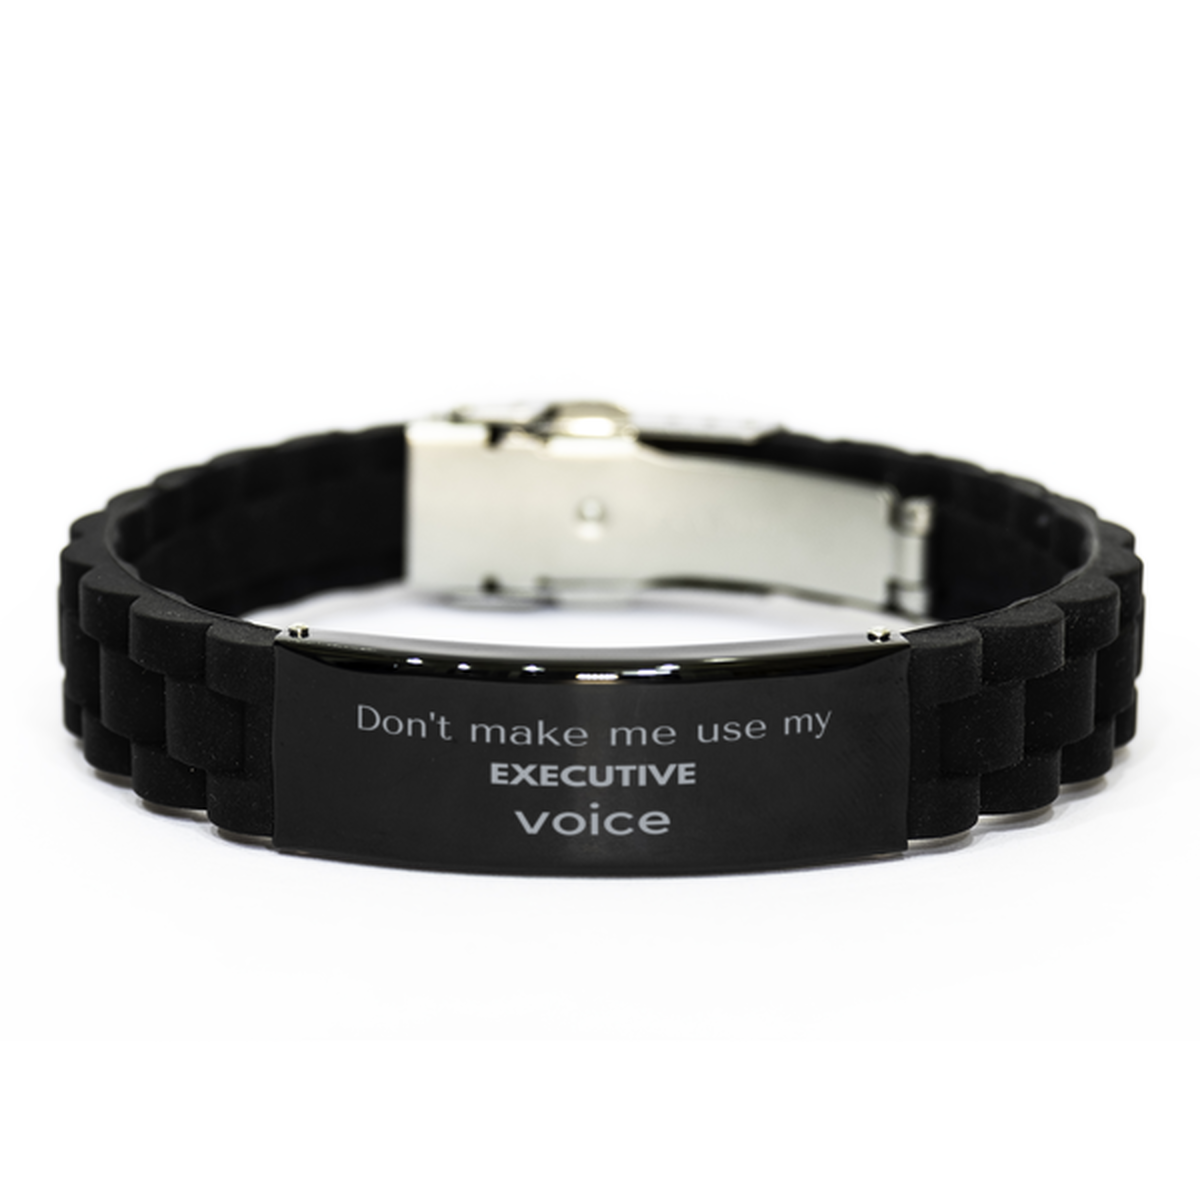 Don't make me use my Executive voice, Sarcasm Executive Gifts, Christmas Executive Black Glidelock Clasp Bracelet Birthday Unique Gifts For Executive Coworkers, Men, Women, Colleague, Friends